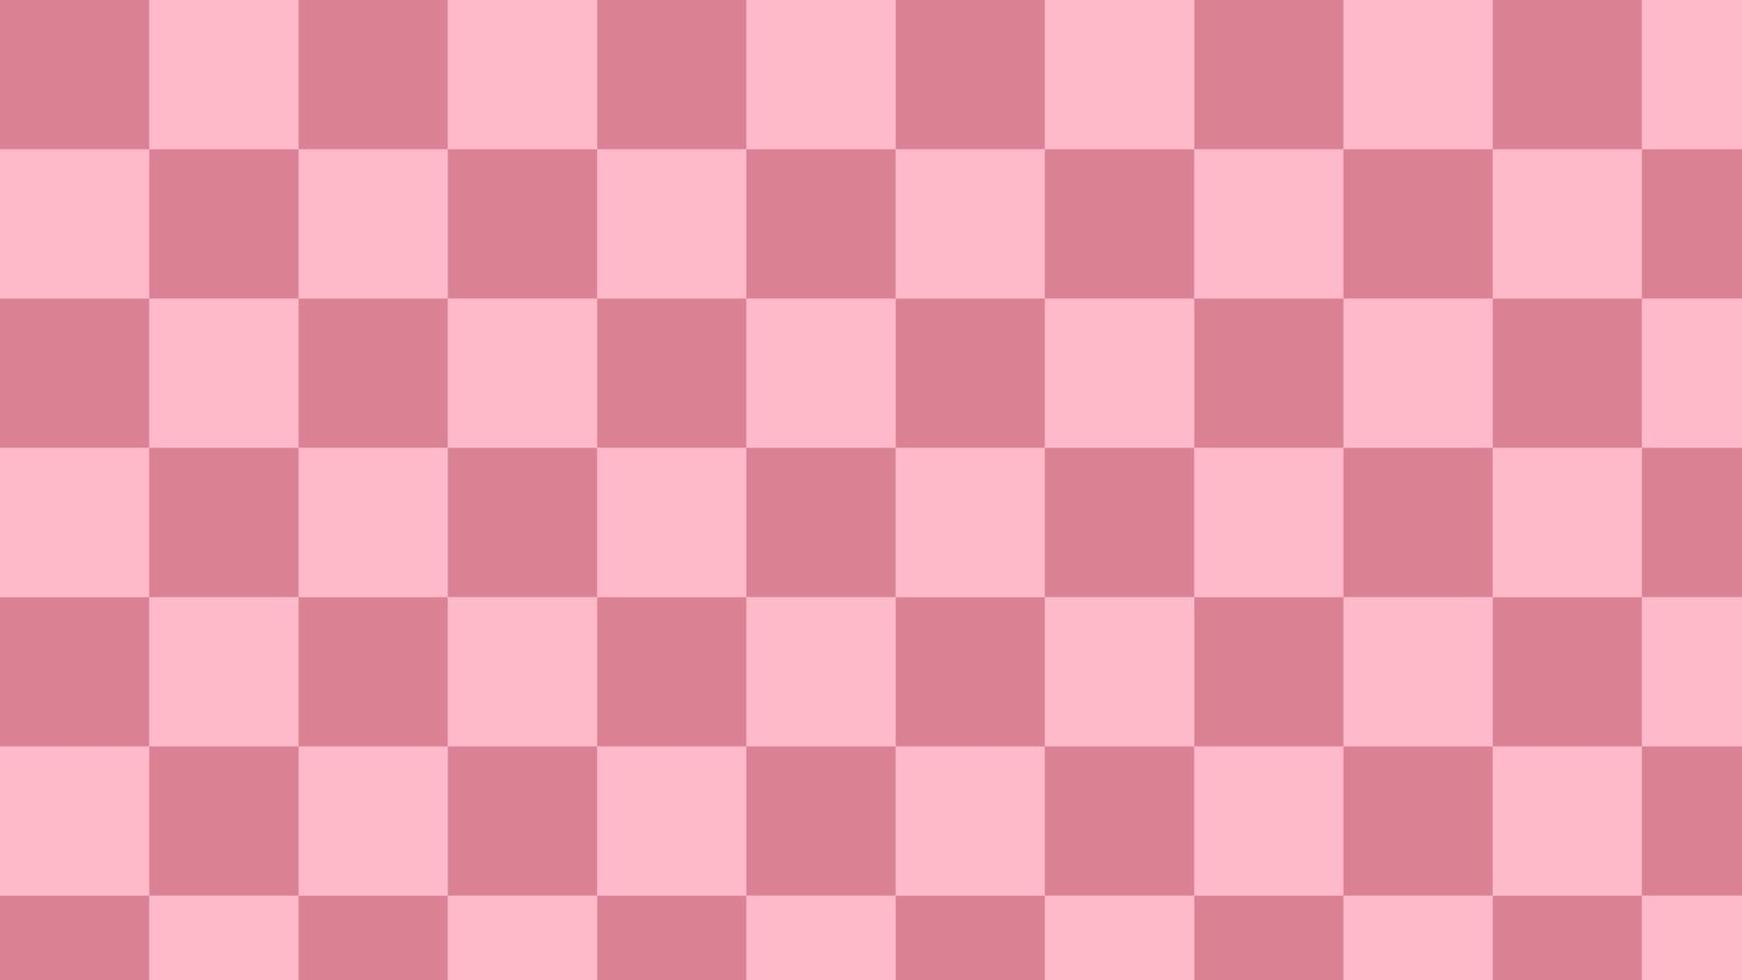 aesthetic pink checkers, gingham, plaid, checkered, checkerboard wallpaper illustration, perfect for wallpaper, backdrop, background vector